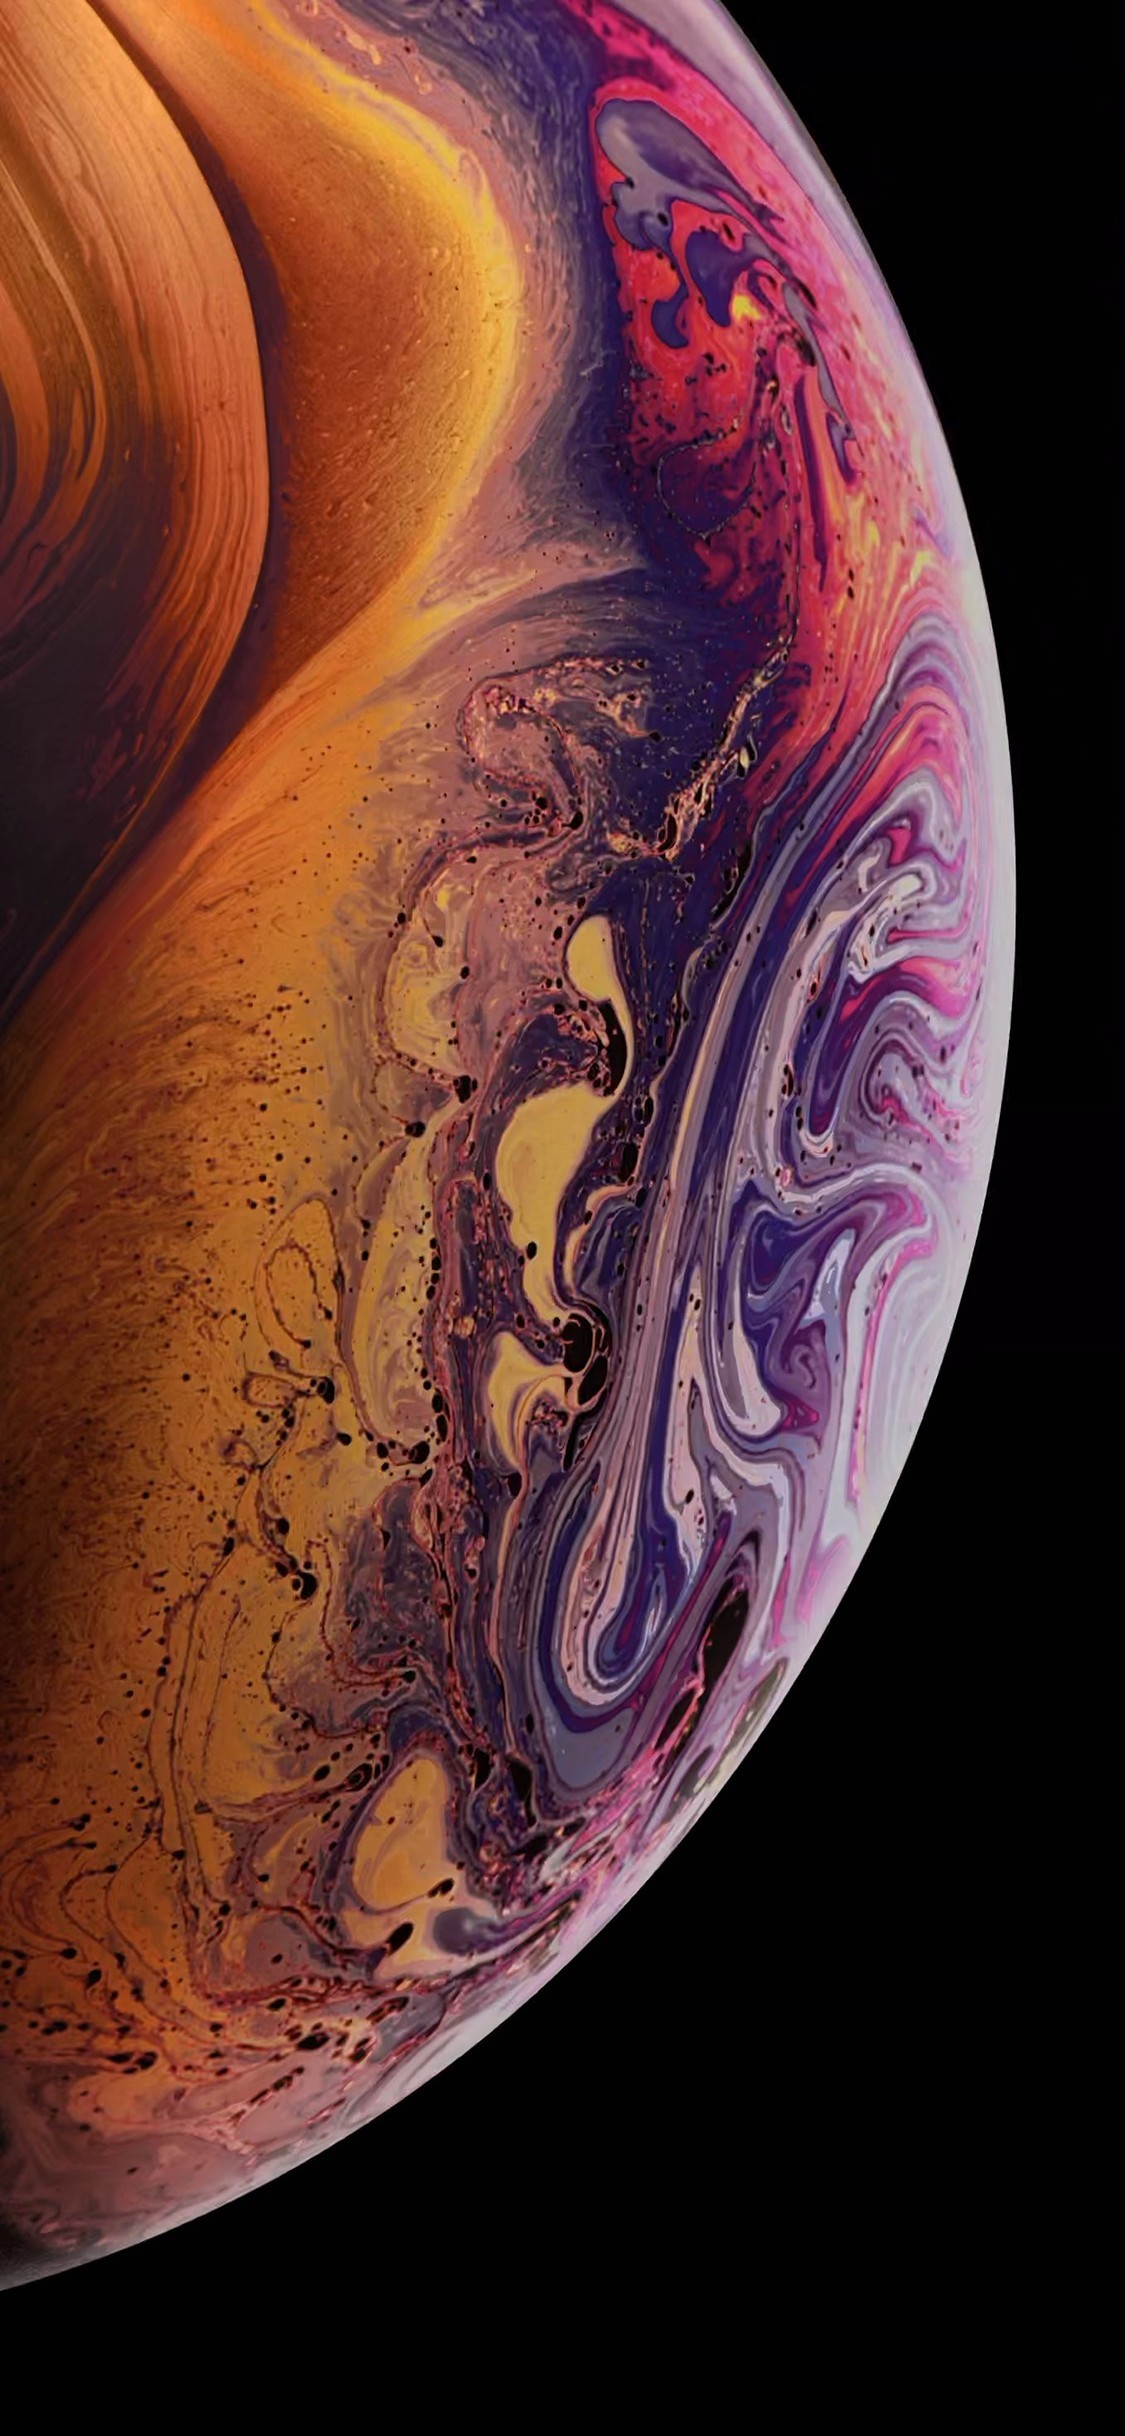 iPhone XS Apple Wallpaper with high-resolution 1125x2436 pixel. Download all Mobile Wallpapers and Use them as wallpapers for your iPhone, Tablet, iPad, Android and other mobile devices